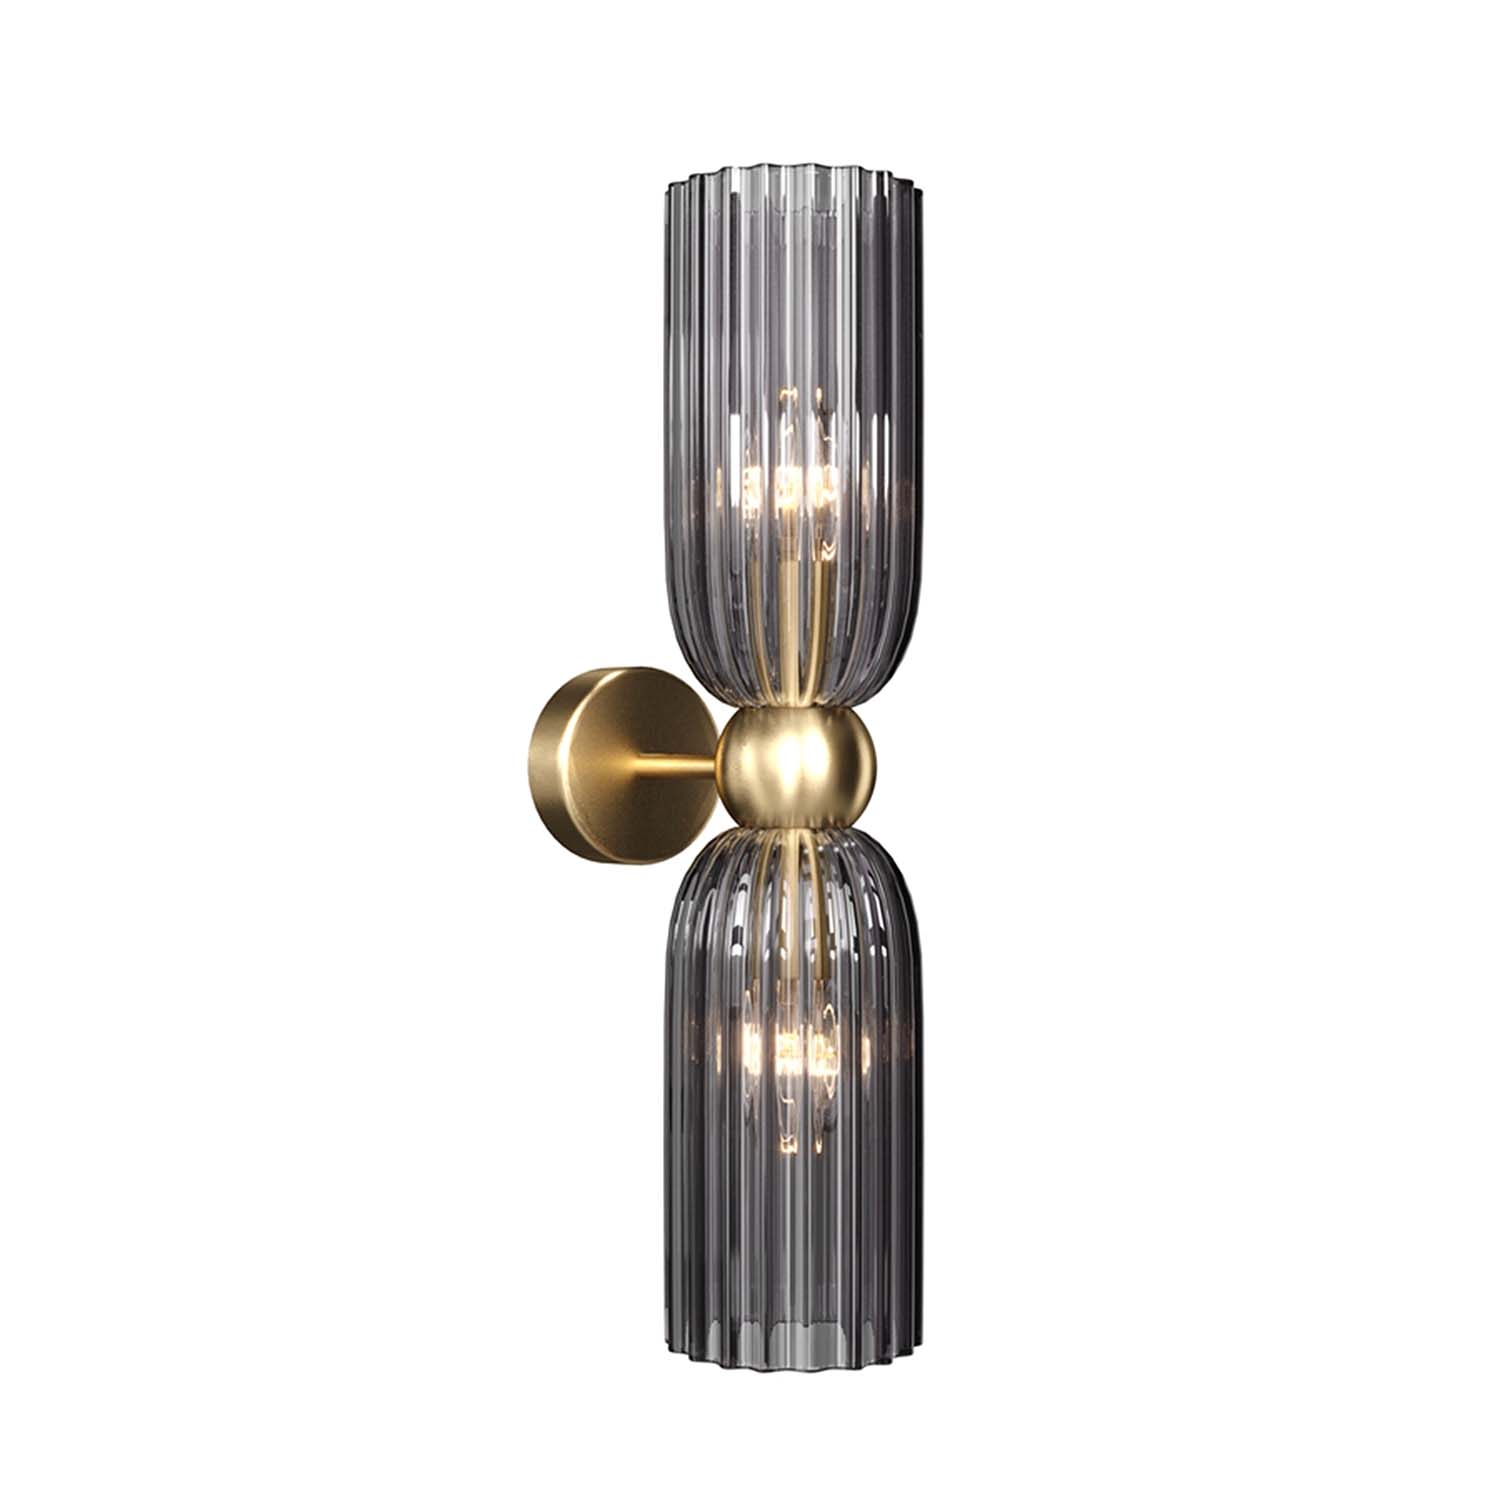 ANTIC - Vintage art deco style glass wall light